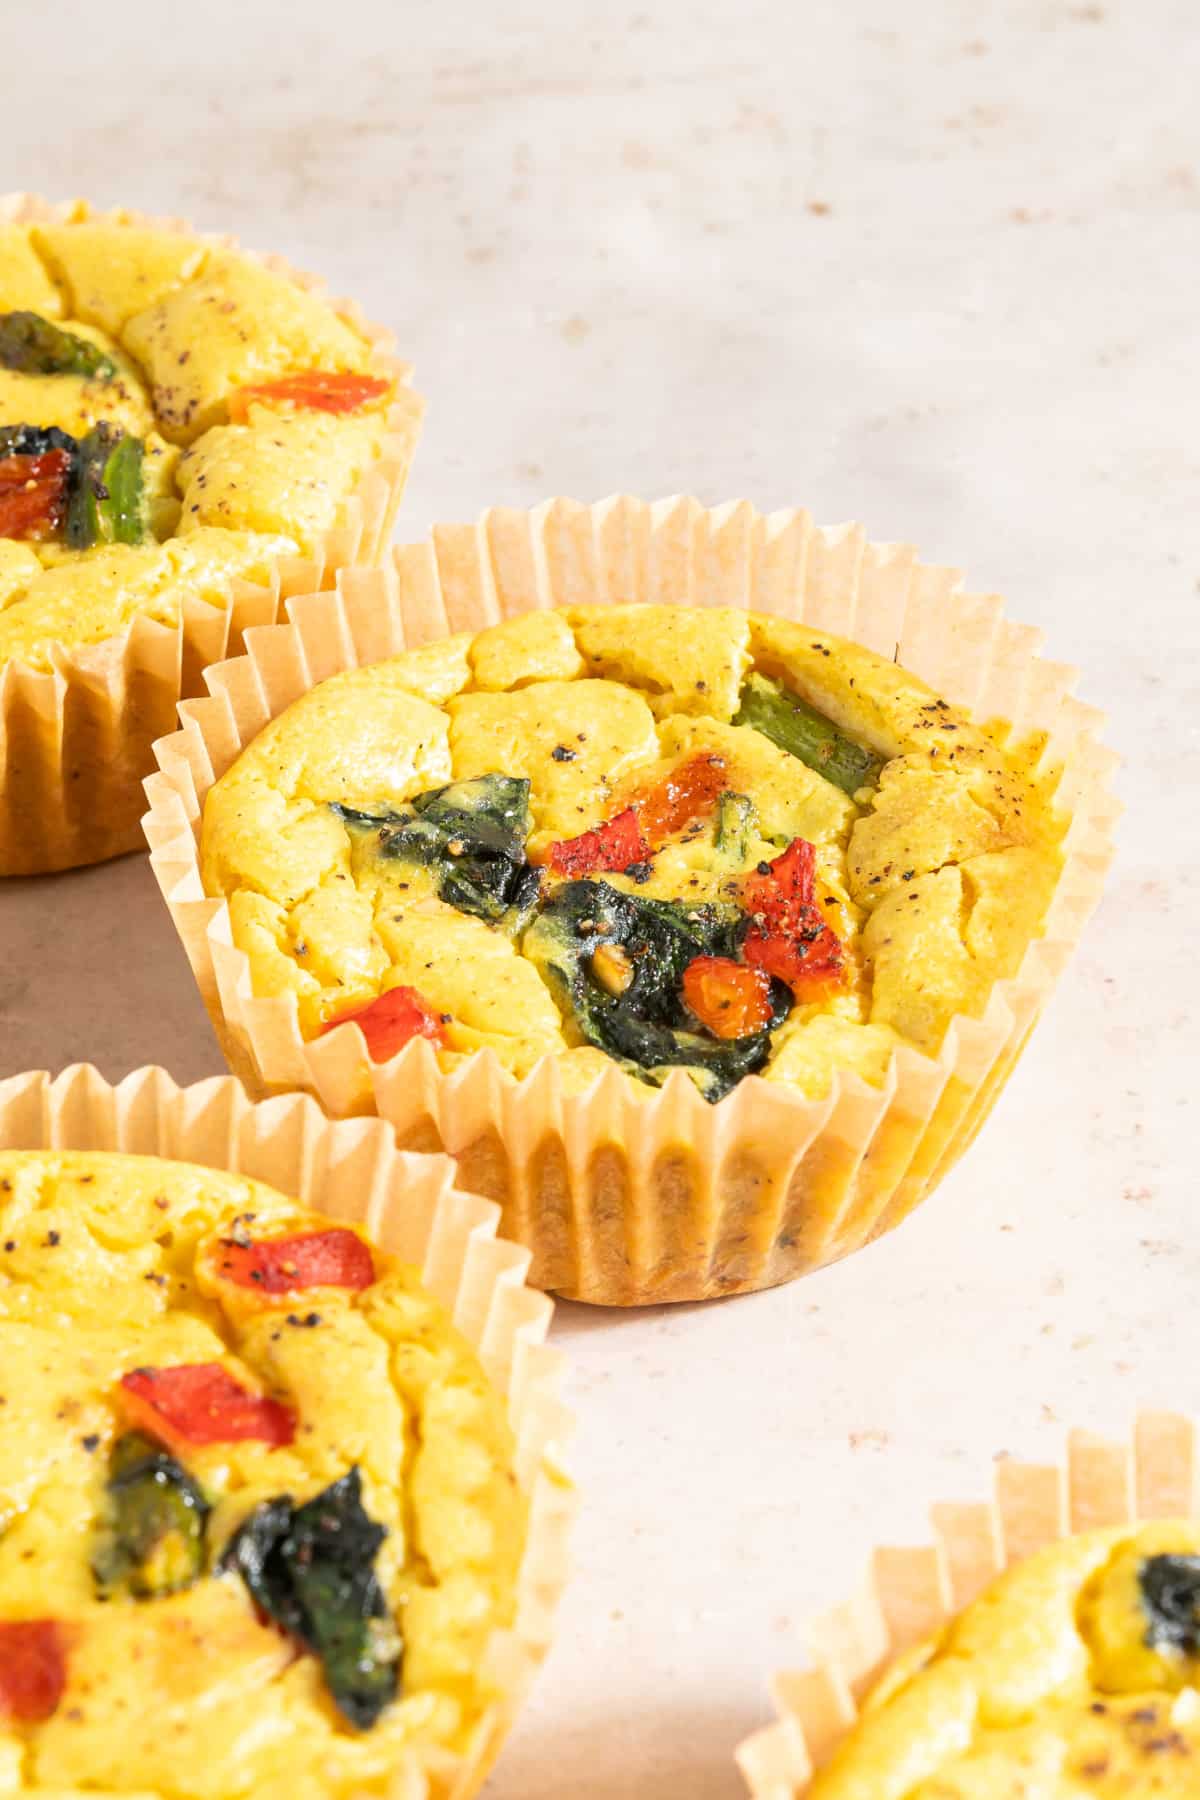 Four mini vegan egg cups baked in cupcake liners sit on an off white surface. The vegan egg bites are bright yellow from turmeric, and are filled with red peppers, spinach, and asparagus.